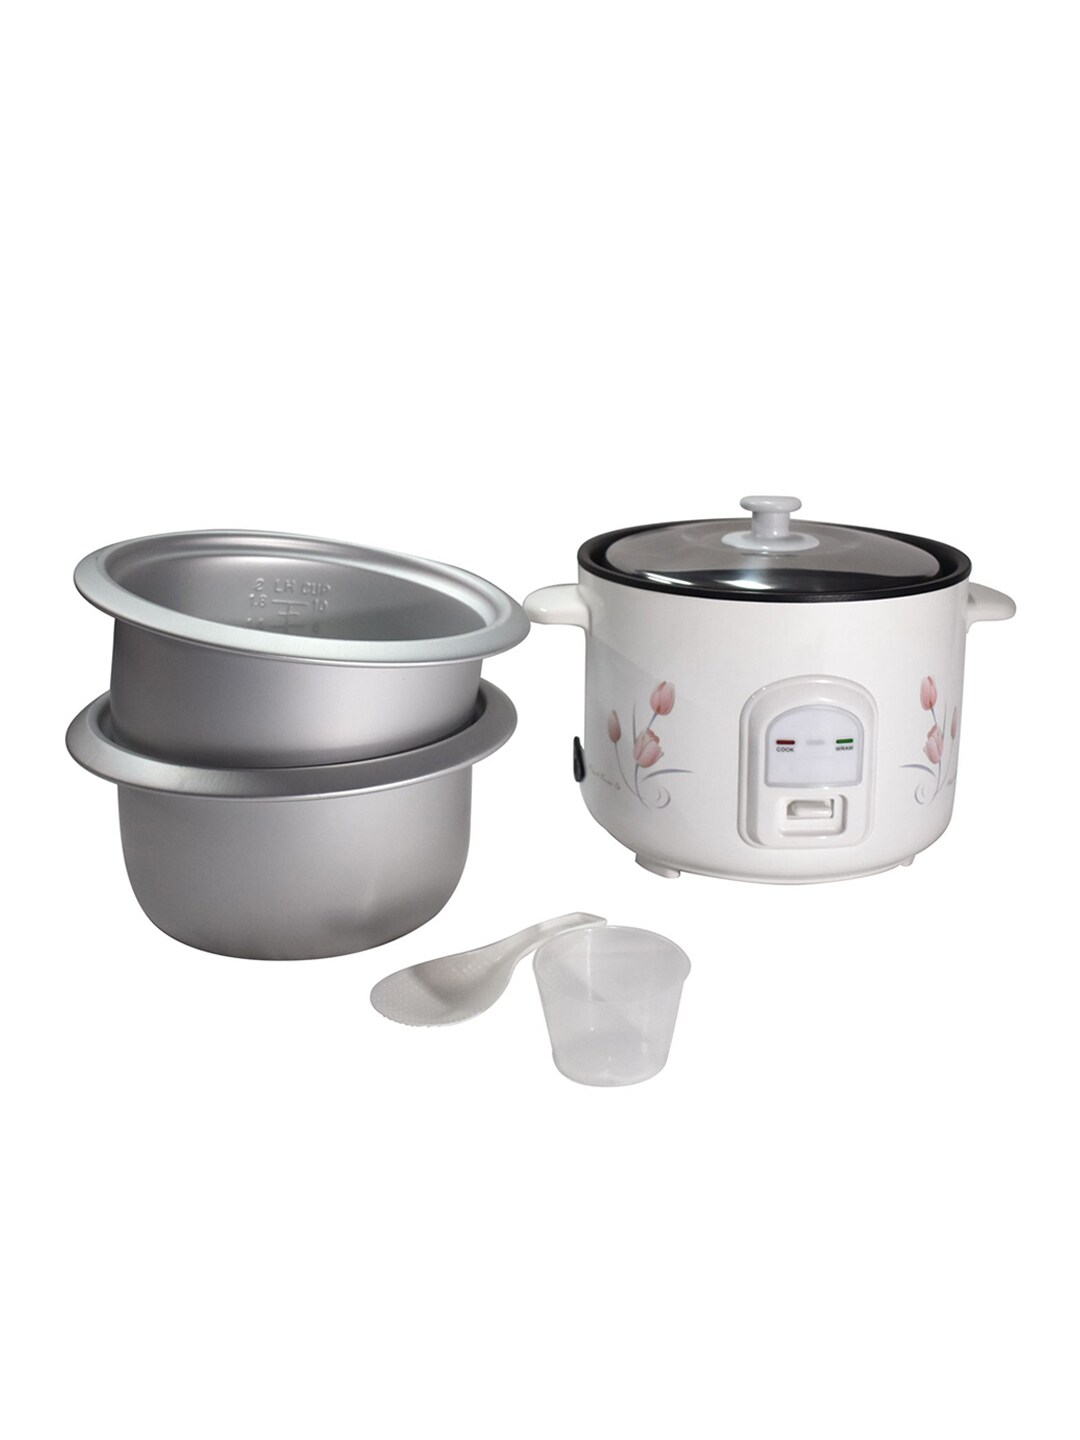 Eslite Automatic Cut Off Rice Cooker With 2 Cooking Pans Measuring Cup Rice Spoon 1.8 Ltr Price in India